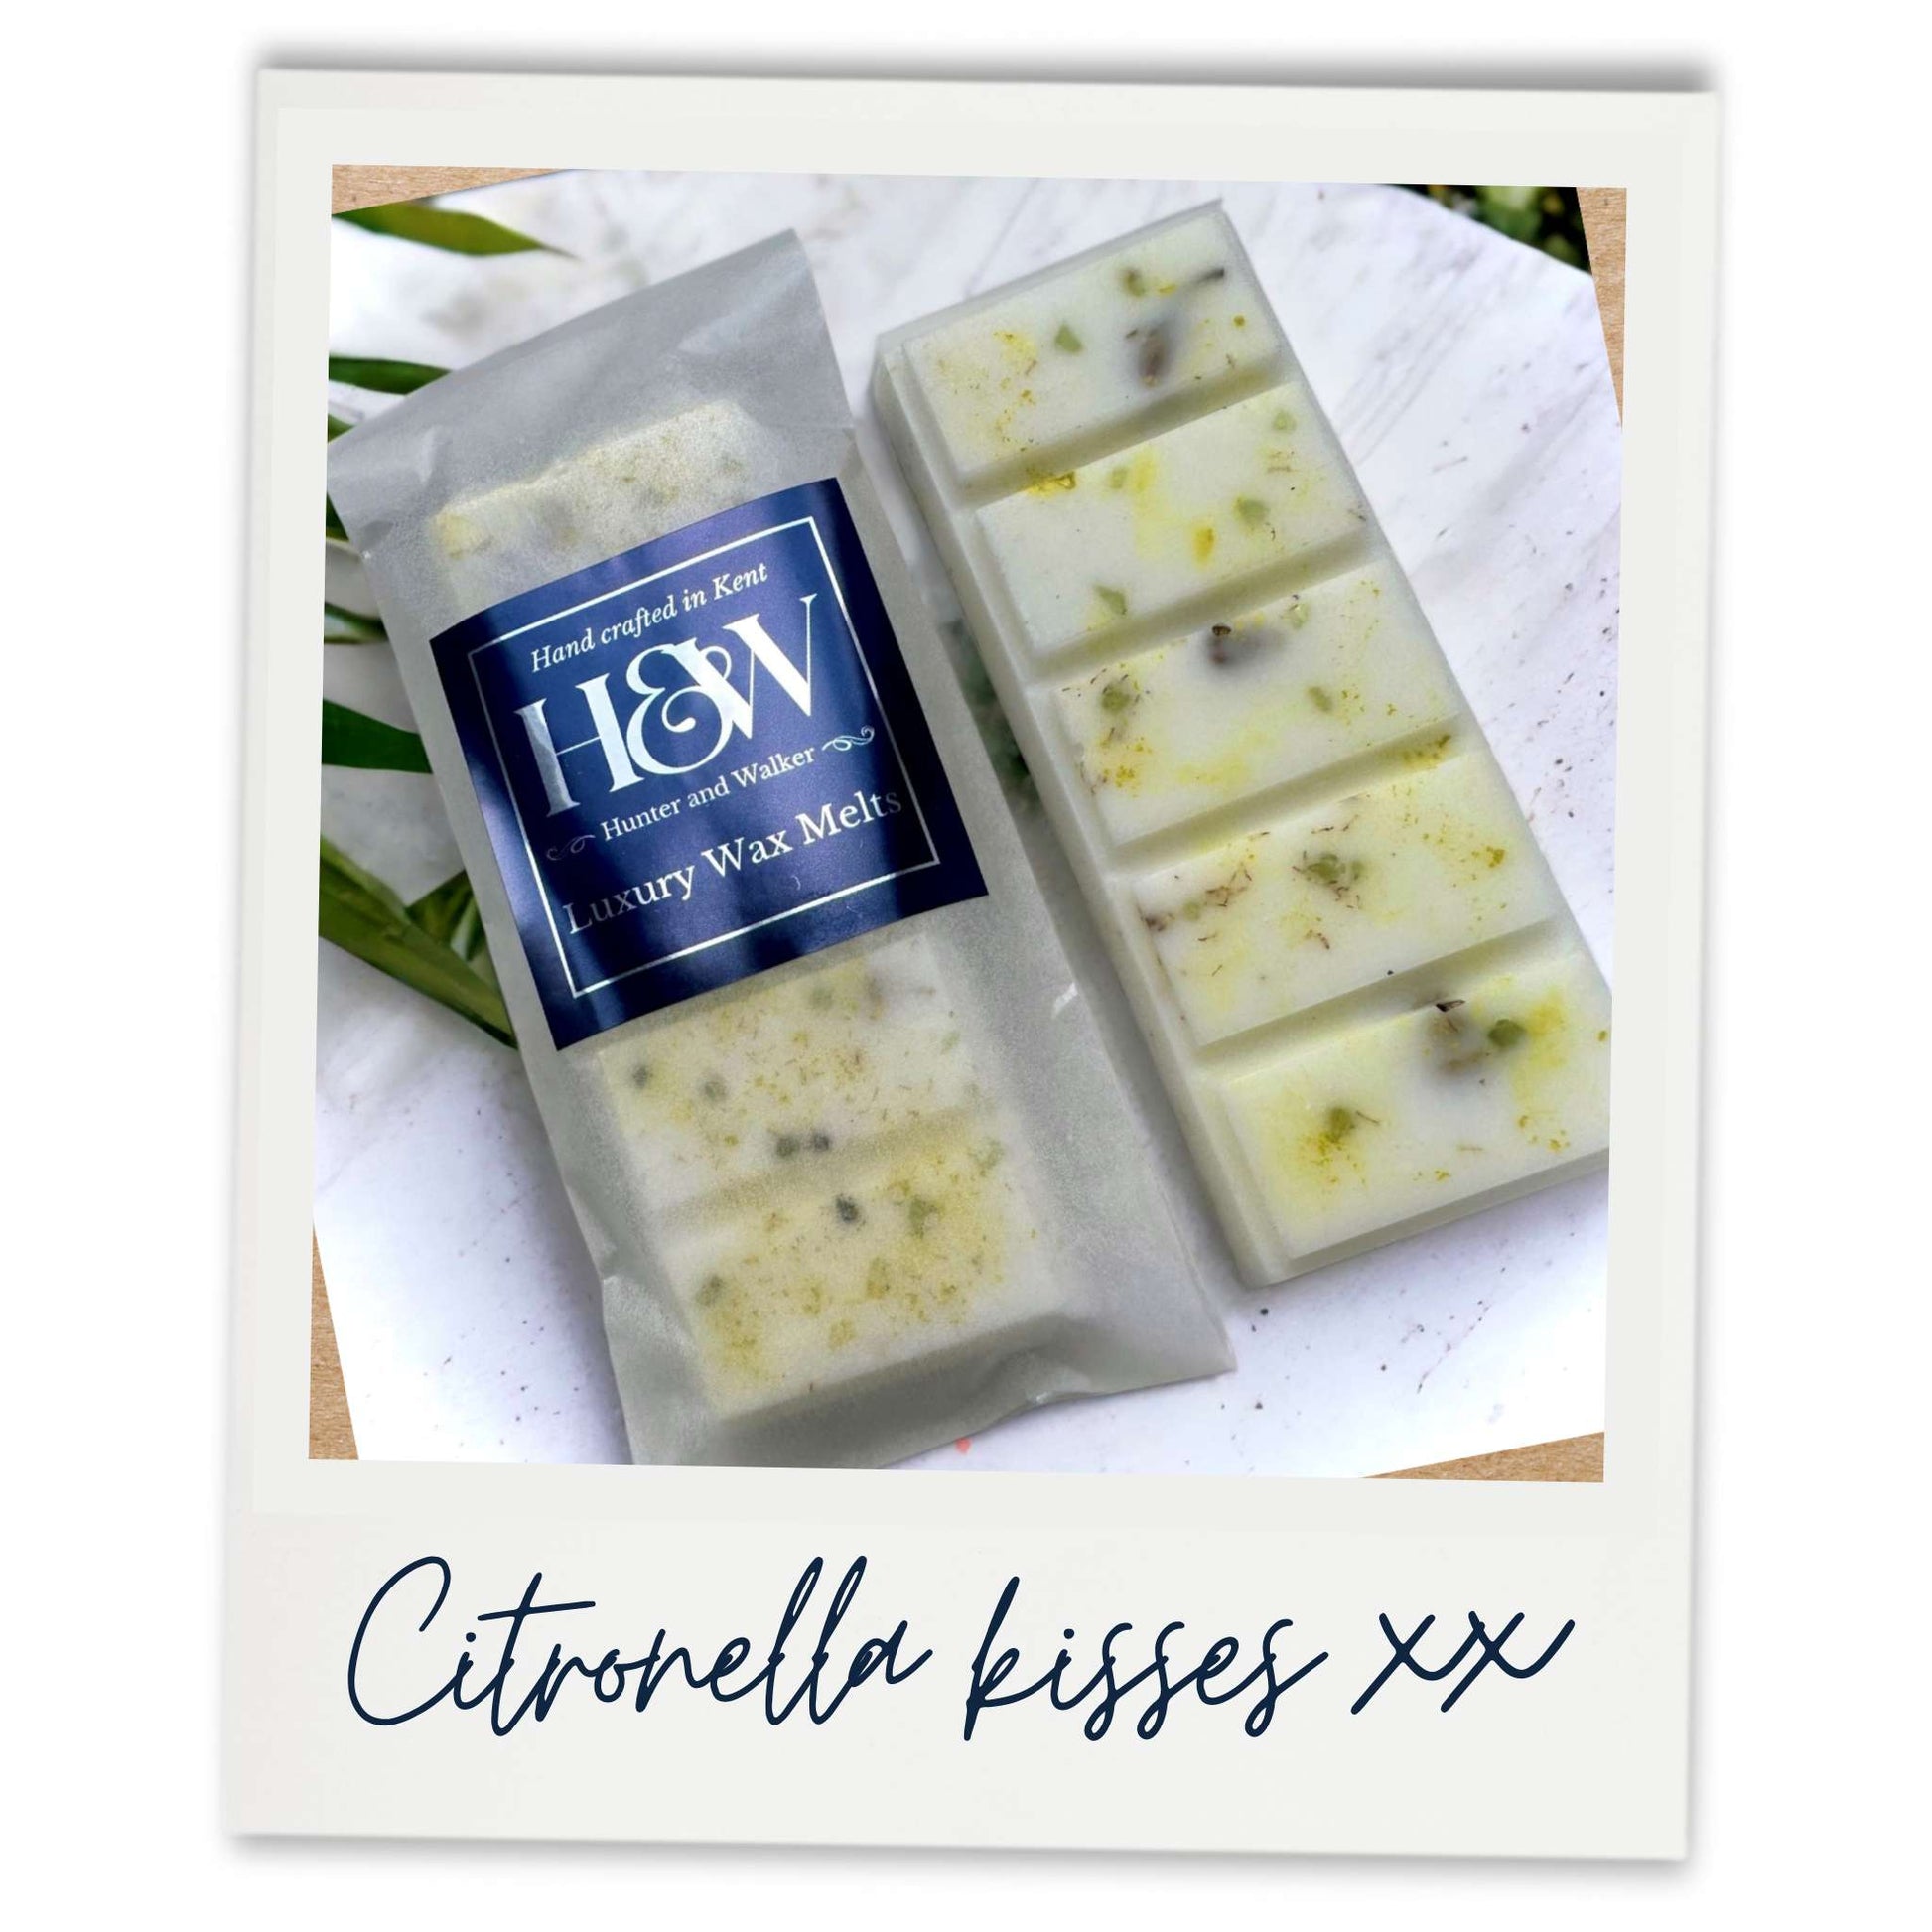 Our natural mosquito wax melts with Citronella and Lemongrass essential oils are super boosted with all natural Citrepel to repel mosquitoes and insects